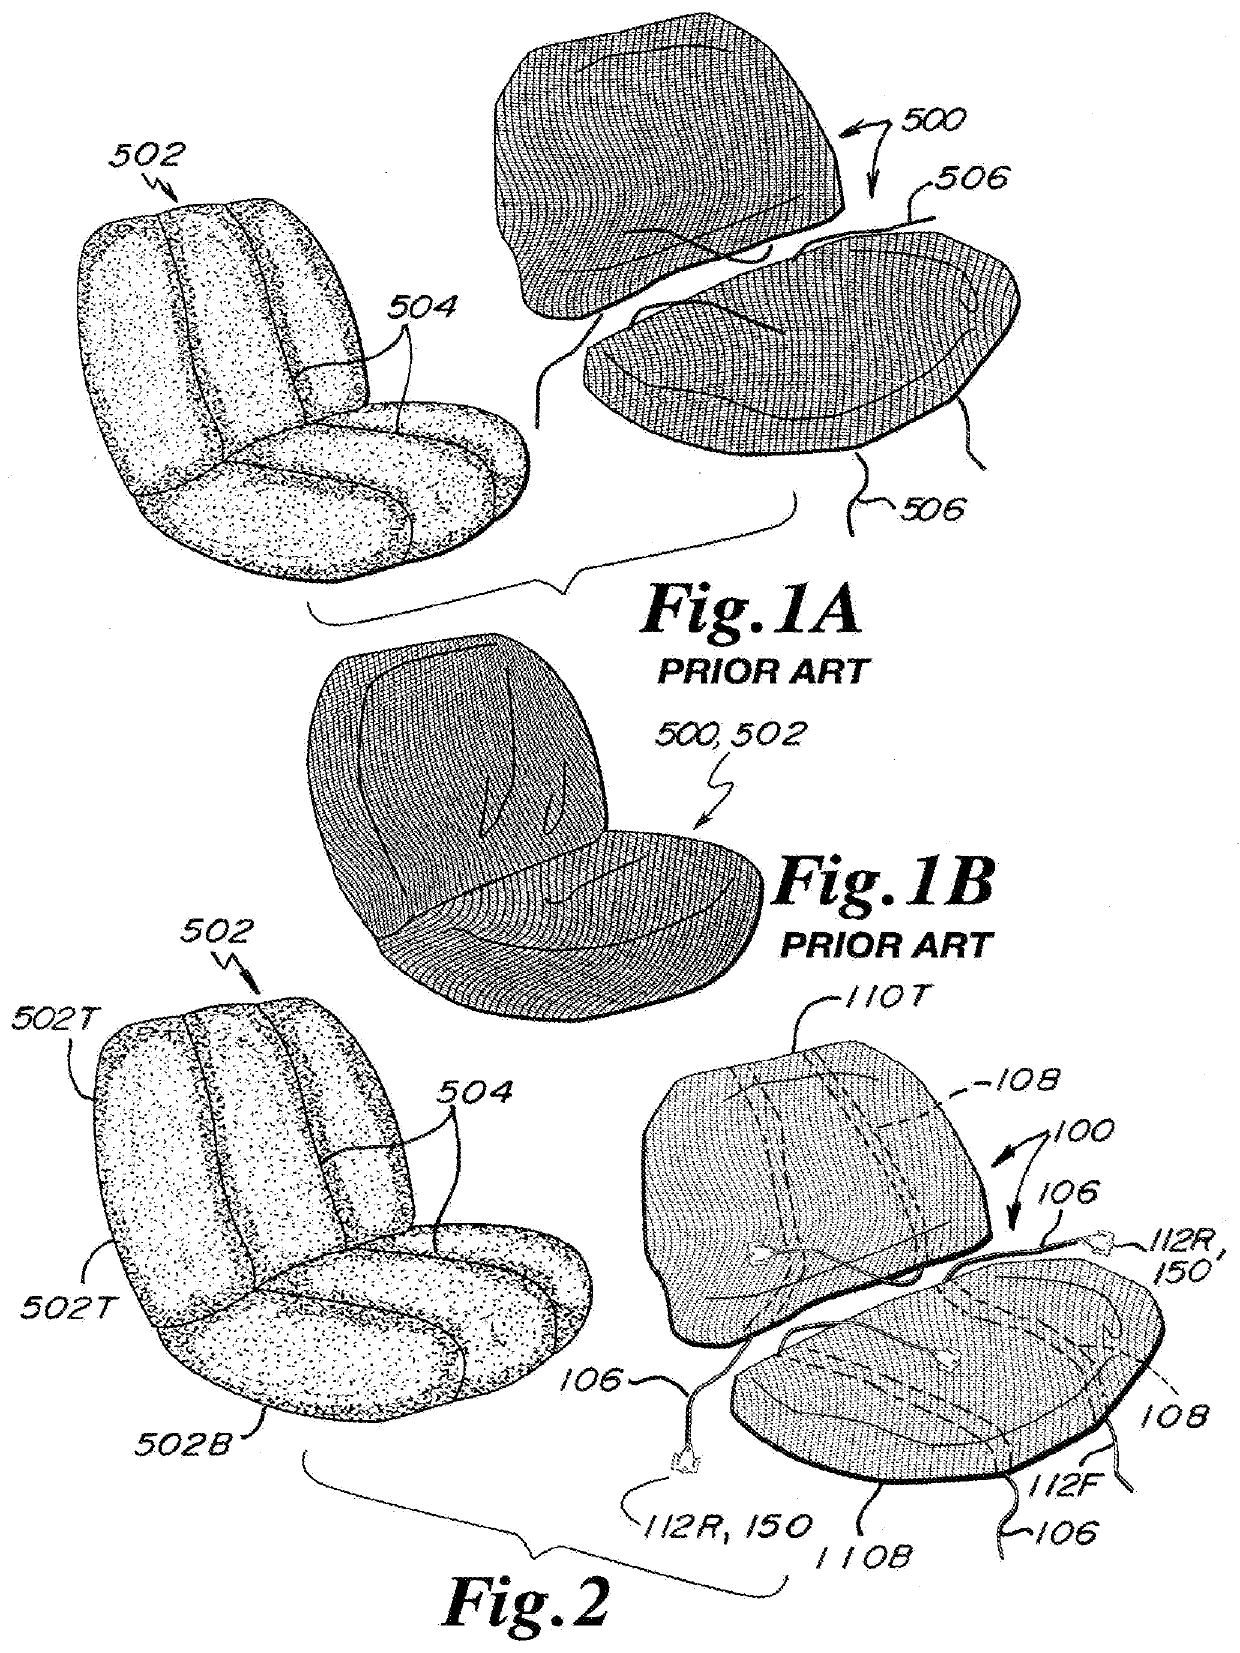 Seat cover for linearly-tufted automobile seats